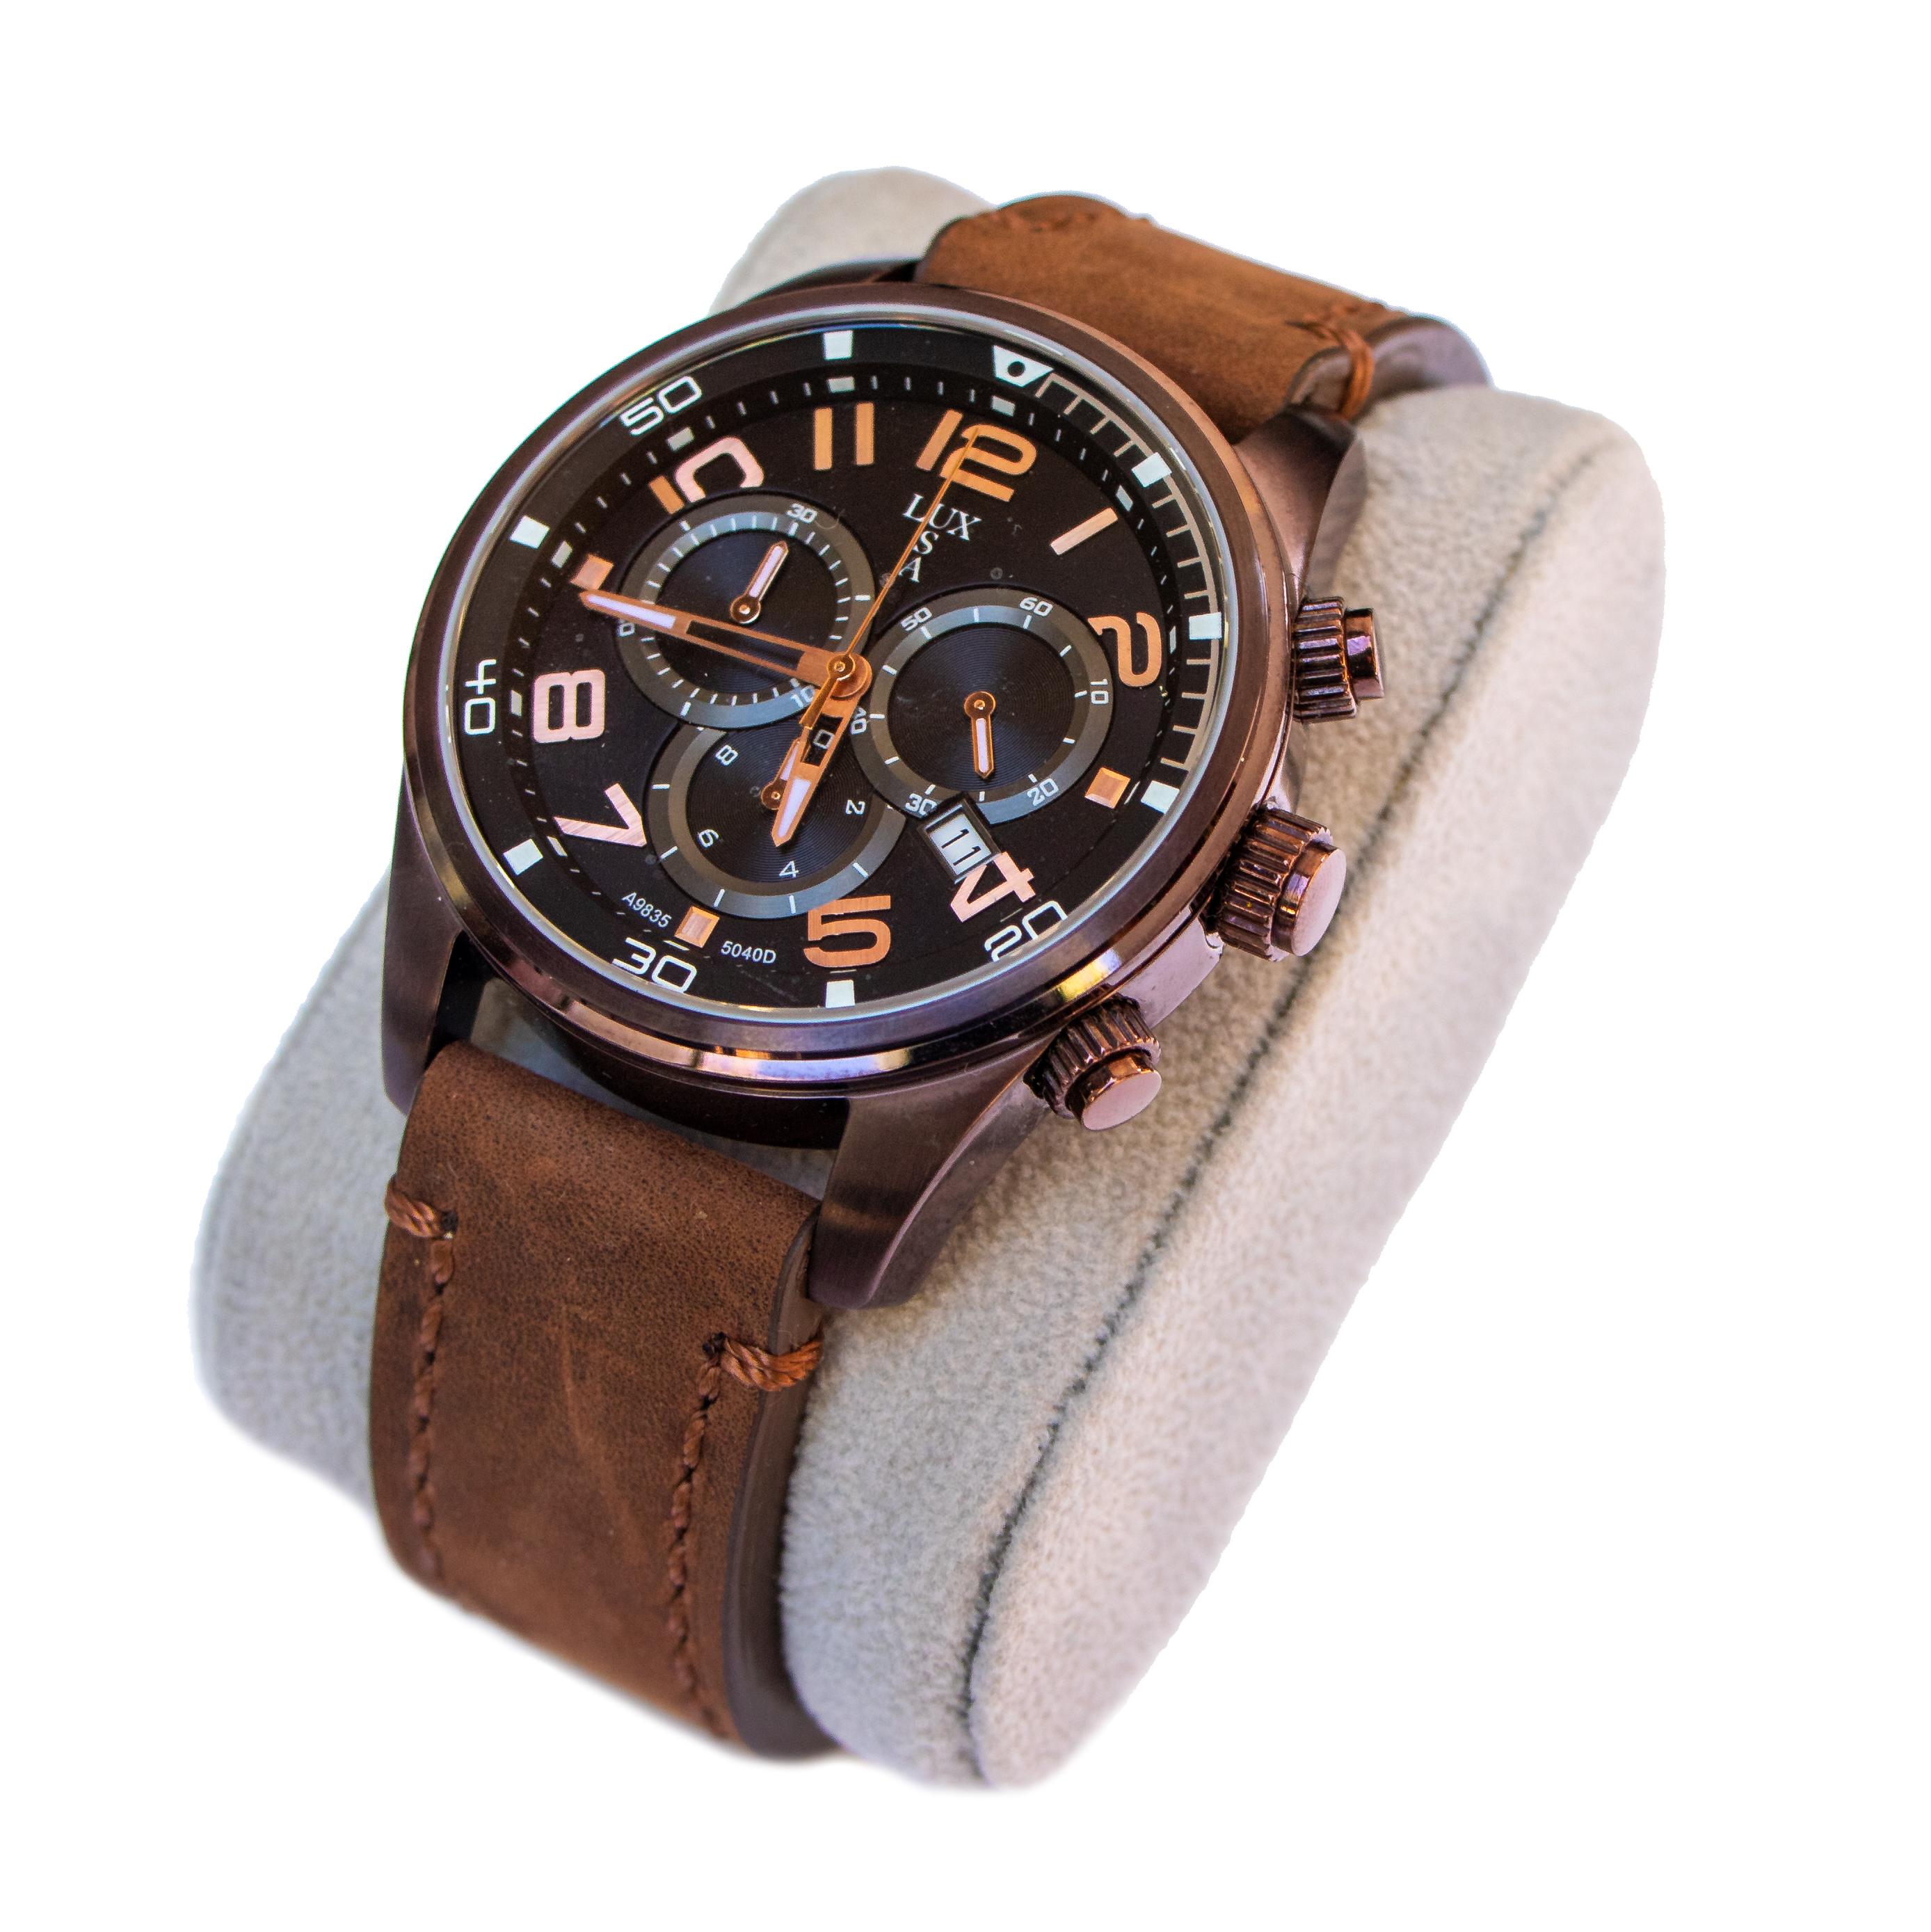 Beautiful stainless steel watch with a black face and brown leather strap. This watch has a date window and features chronograph capabilities - 3 miniature dials that keep track of milliseconds, seconds, and minutes which are all Swiss made and US